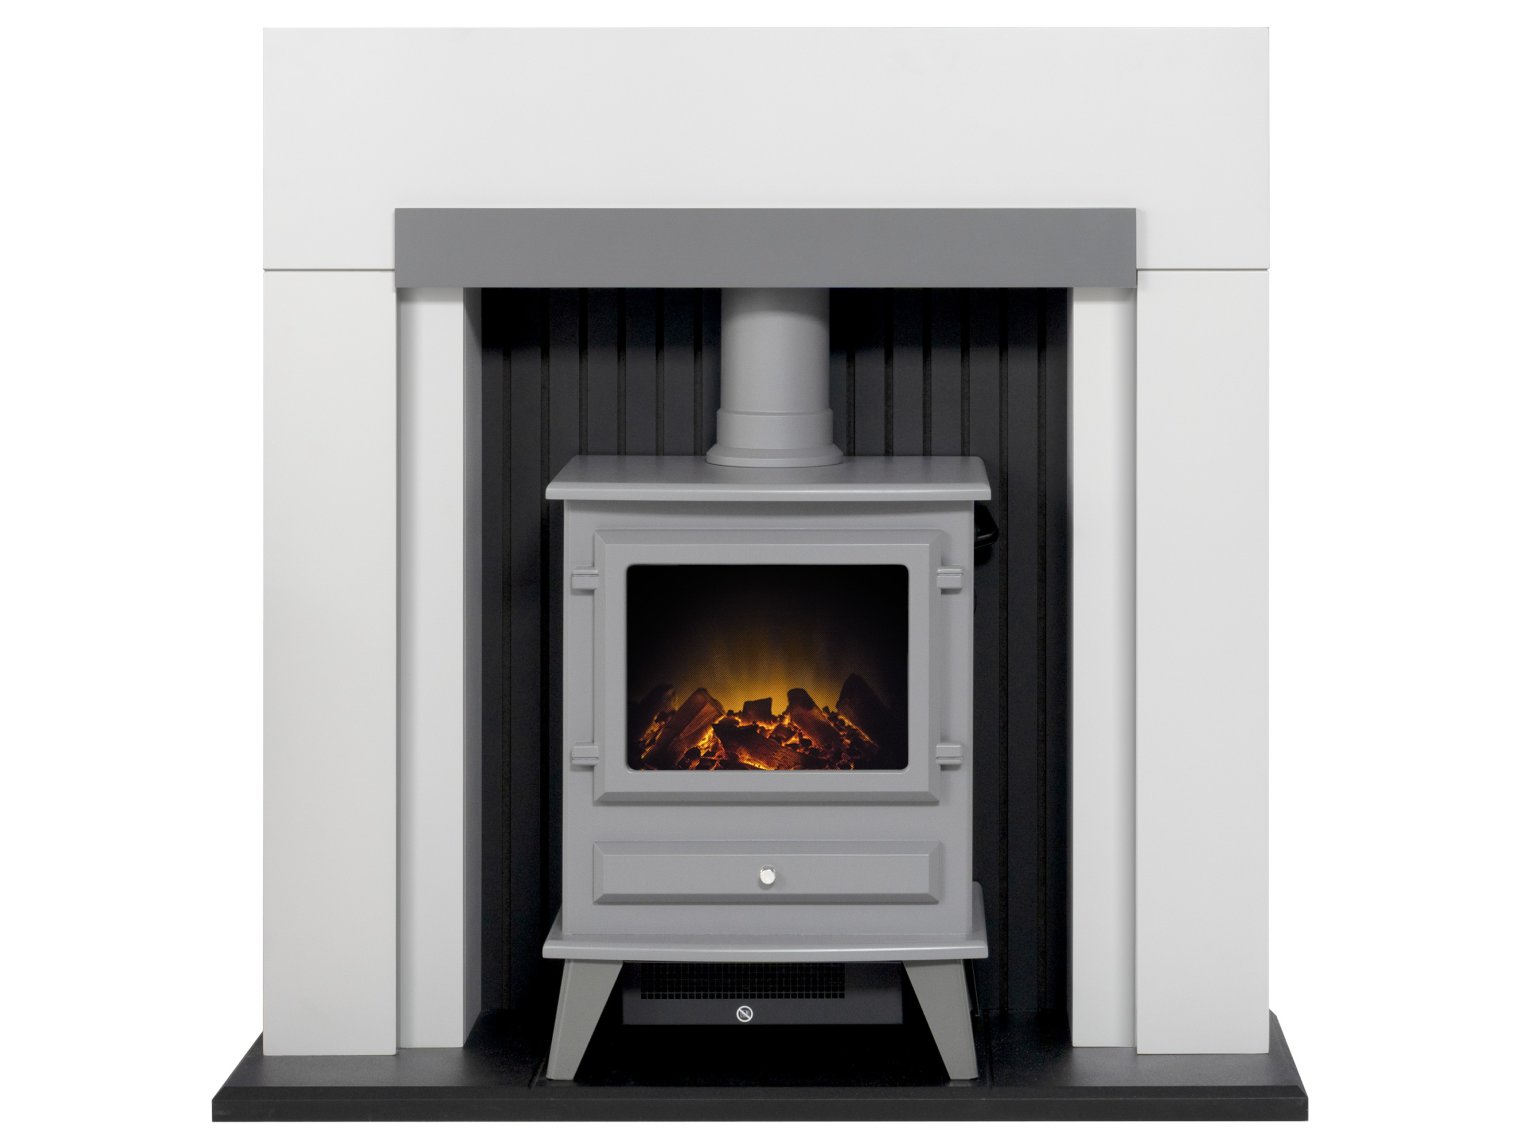 Adam Salzburg in Pure White & Grey with Hudson Electric Stove in Grey, 39 Inch